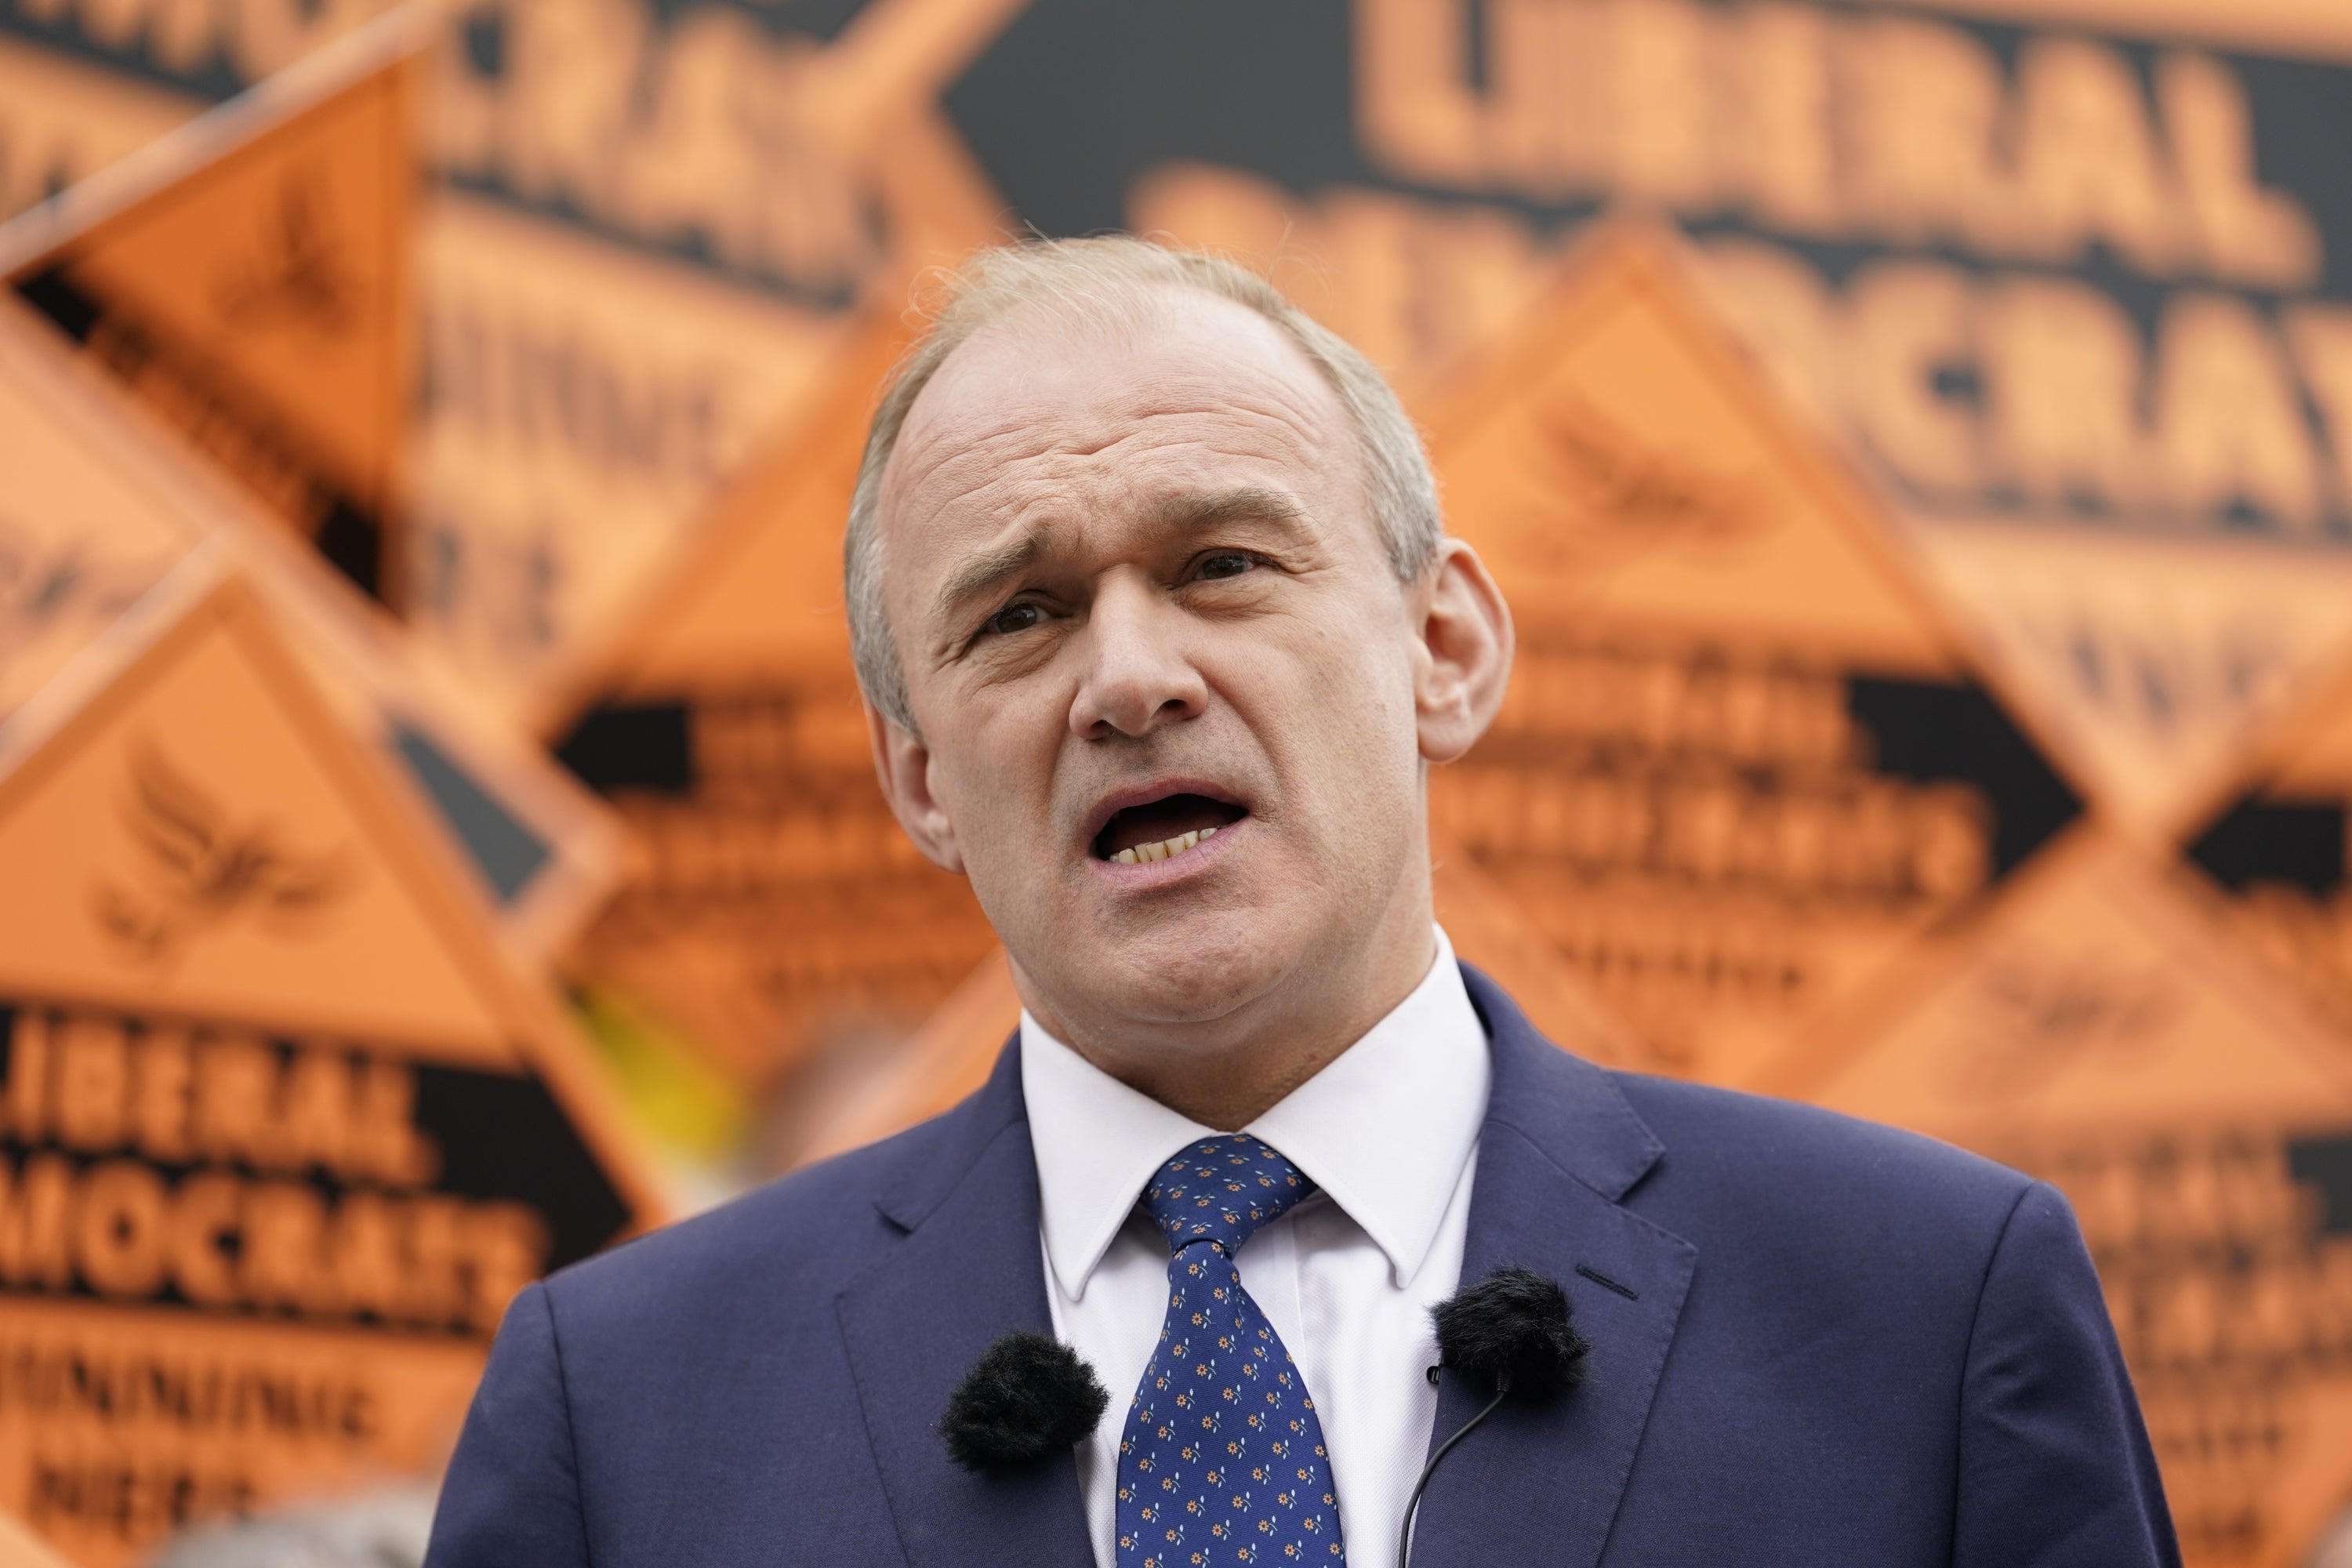 Lib Dem leader Sir Ed Davey said his party will put forward a bill in Parliament aimed at freezing energy bills (Andrew Matthews/PA)